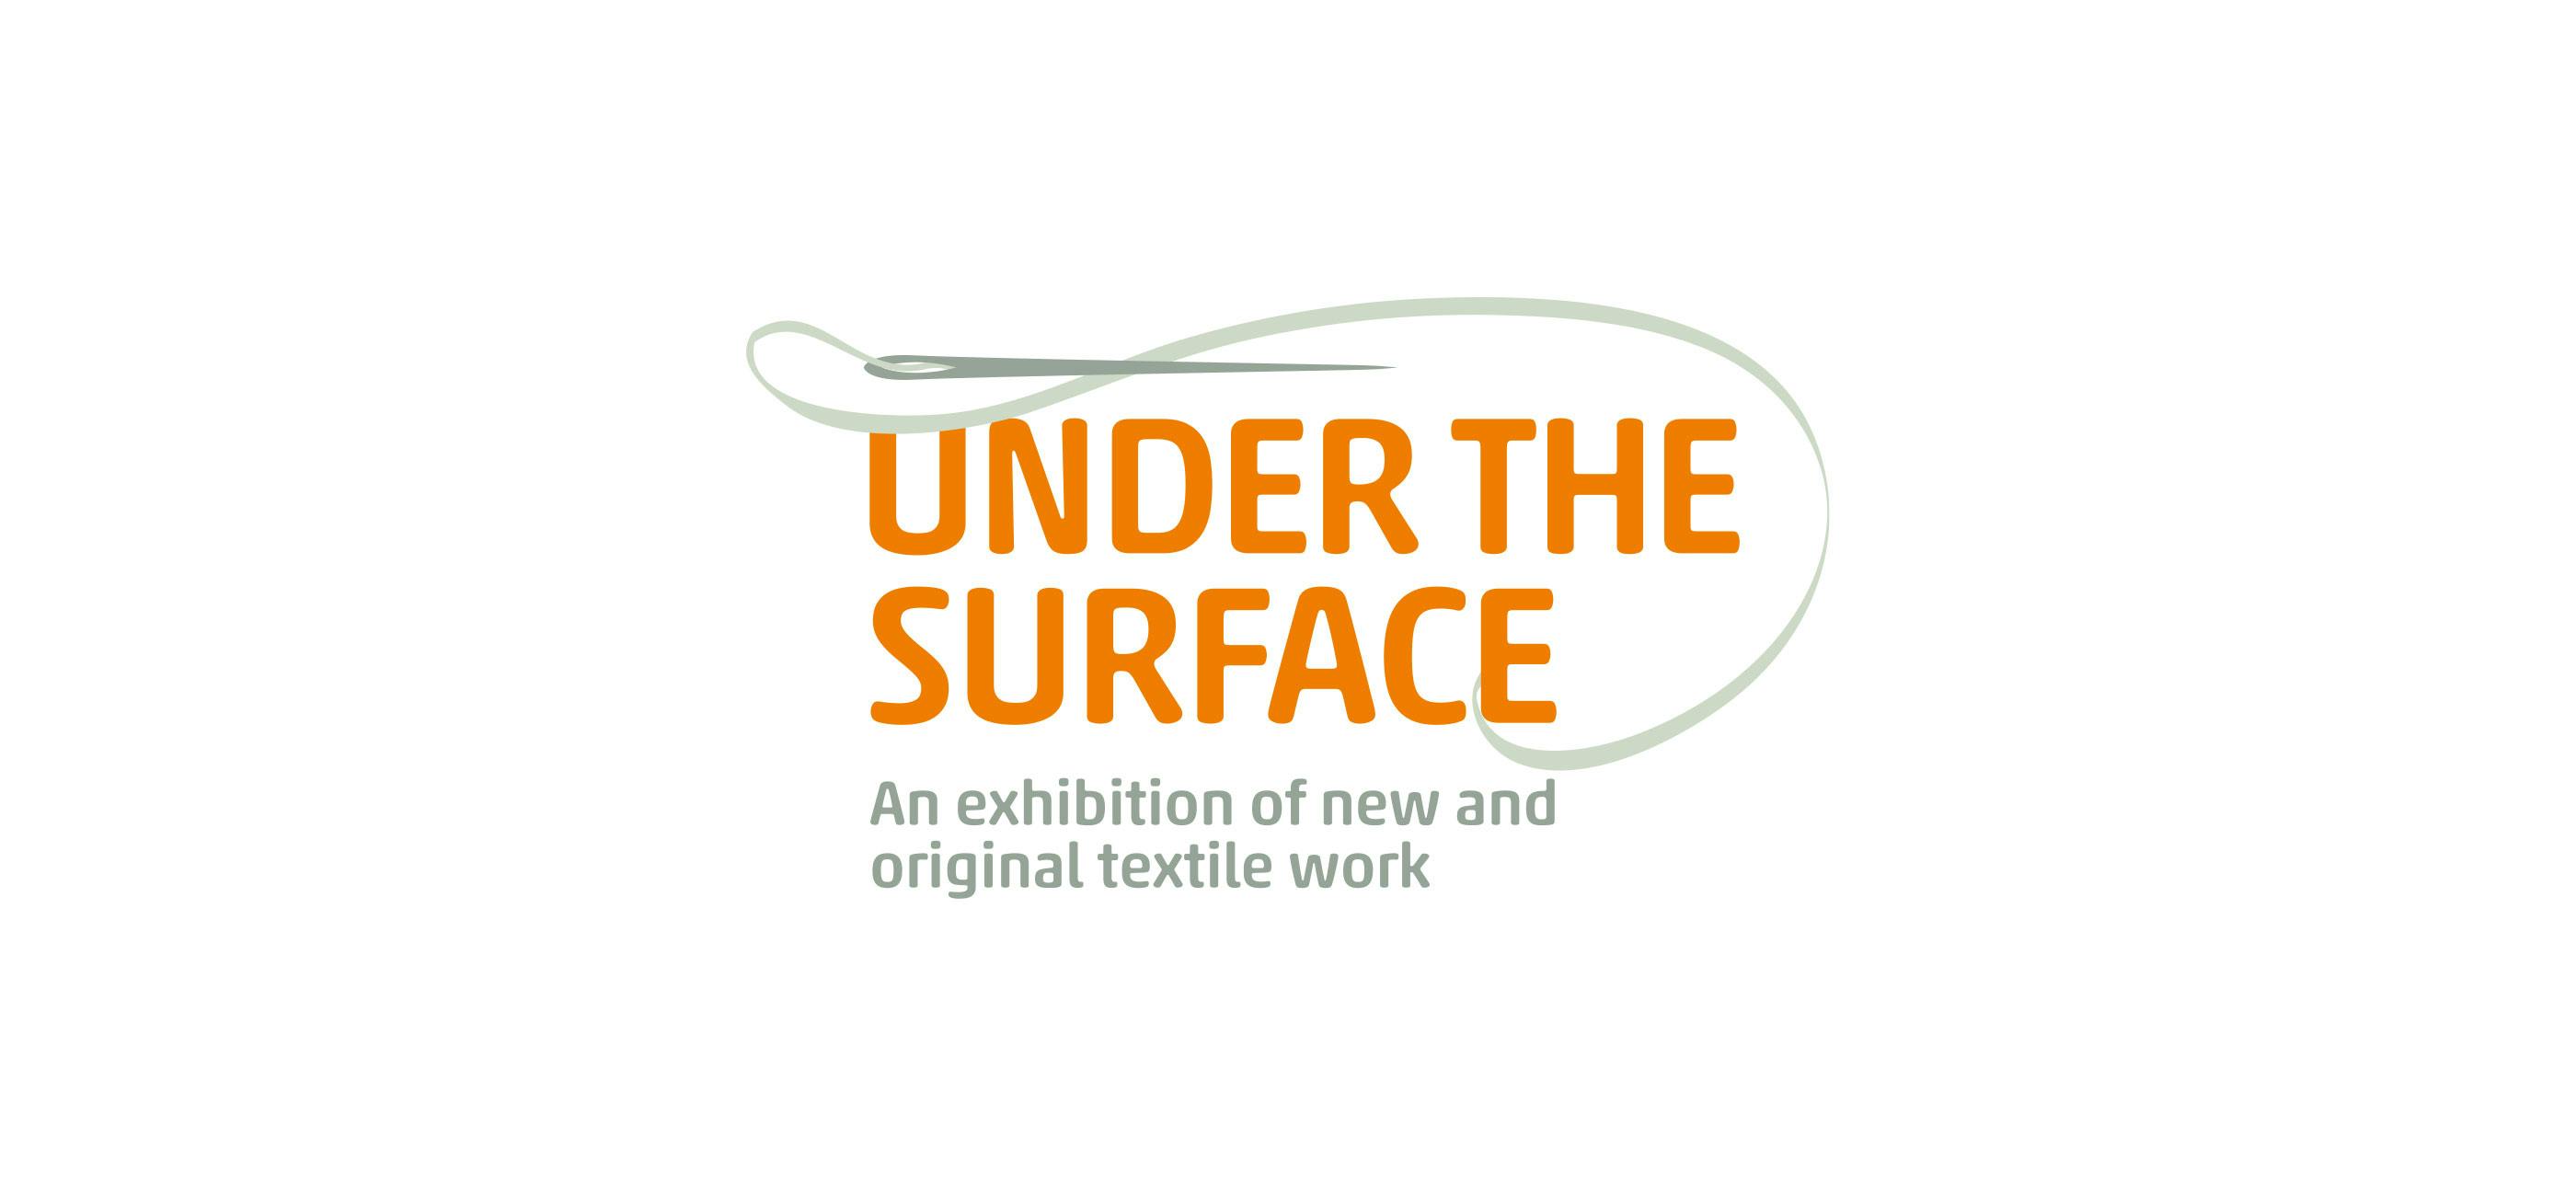 Under the Surface - an exhibition of new and original textile work